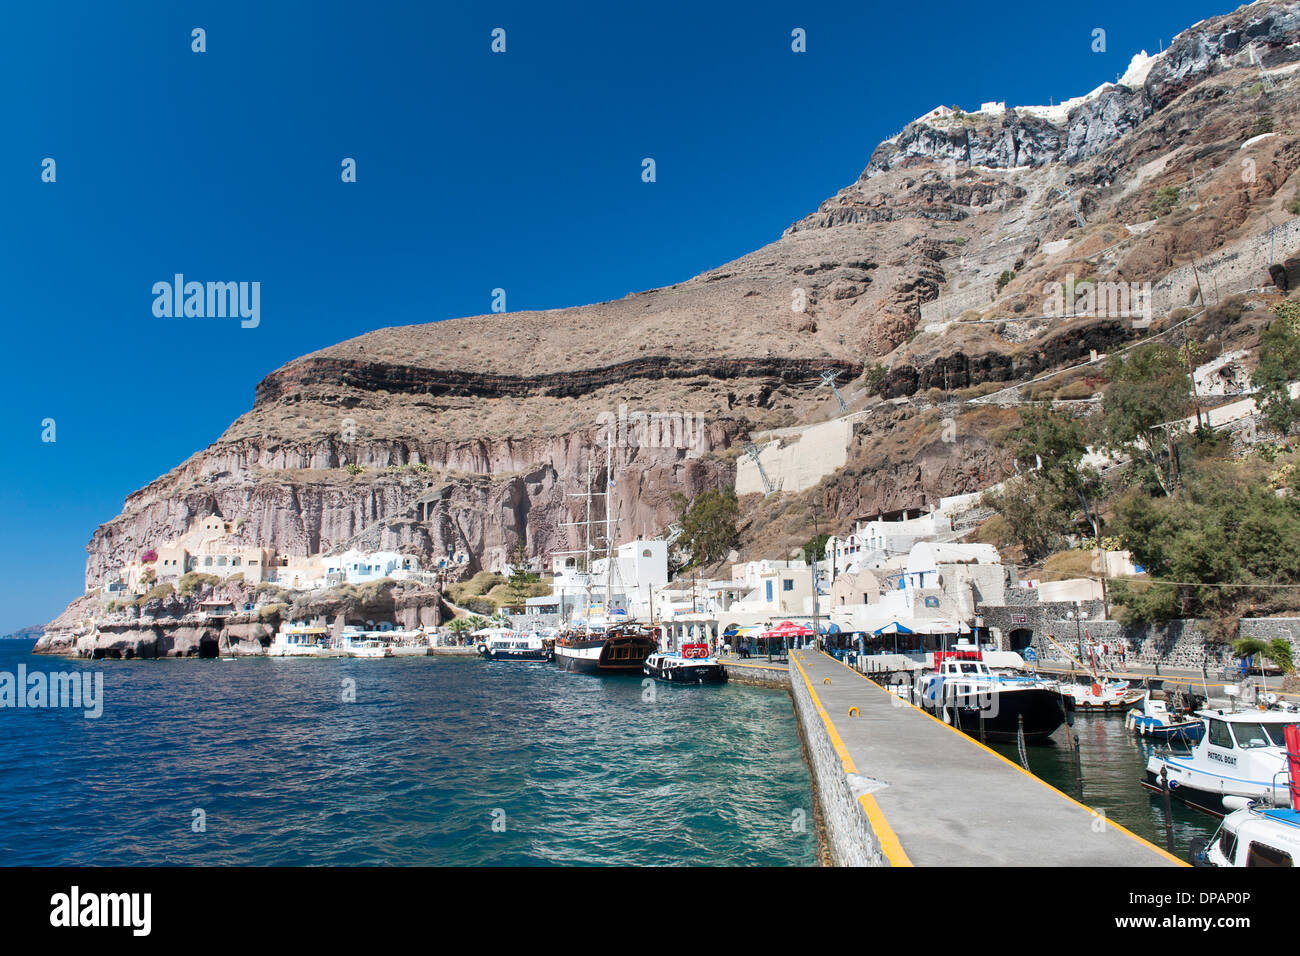 The old port of Fira on the Greek island of Santorini. Stock Photo